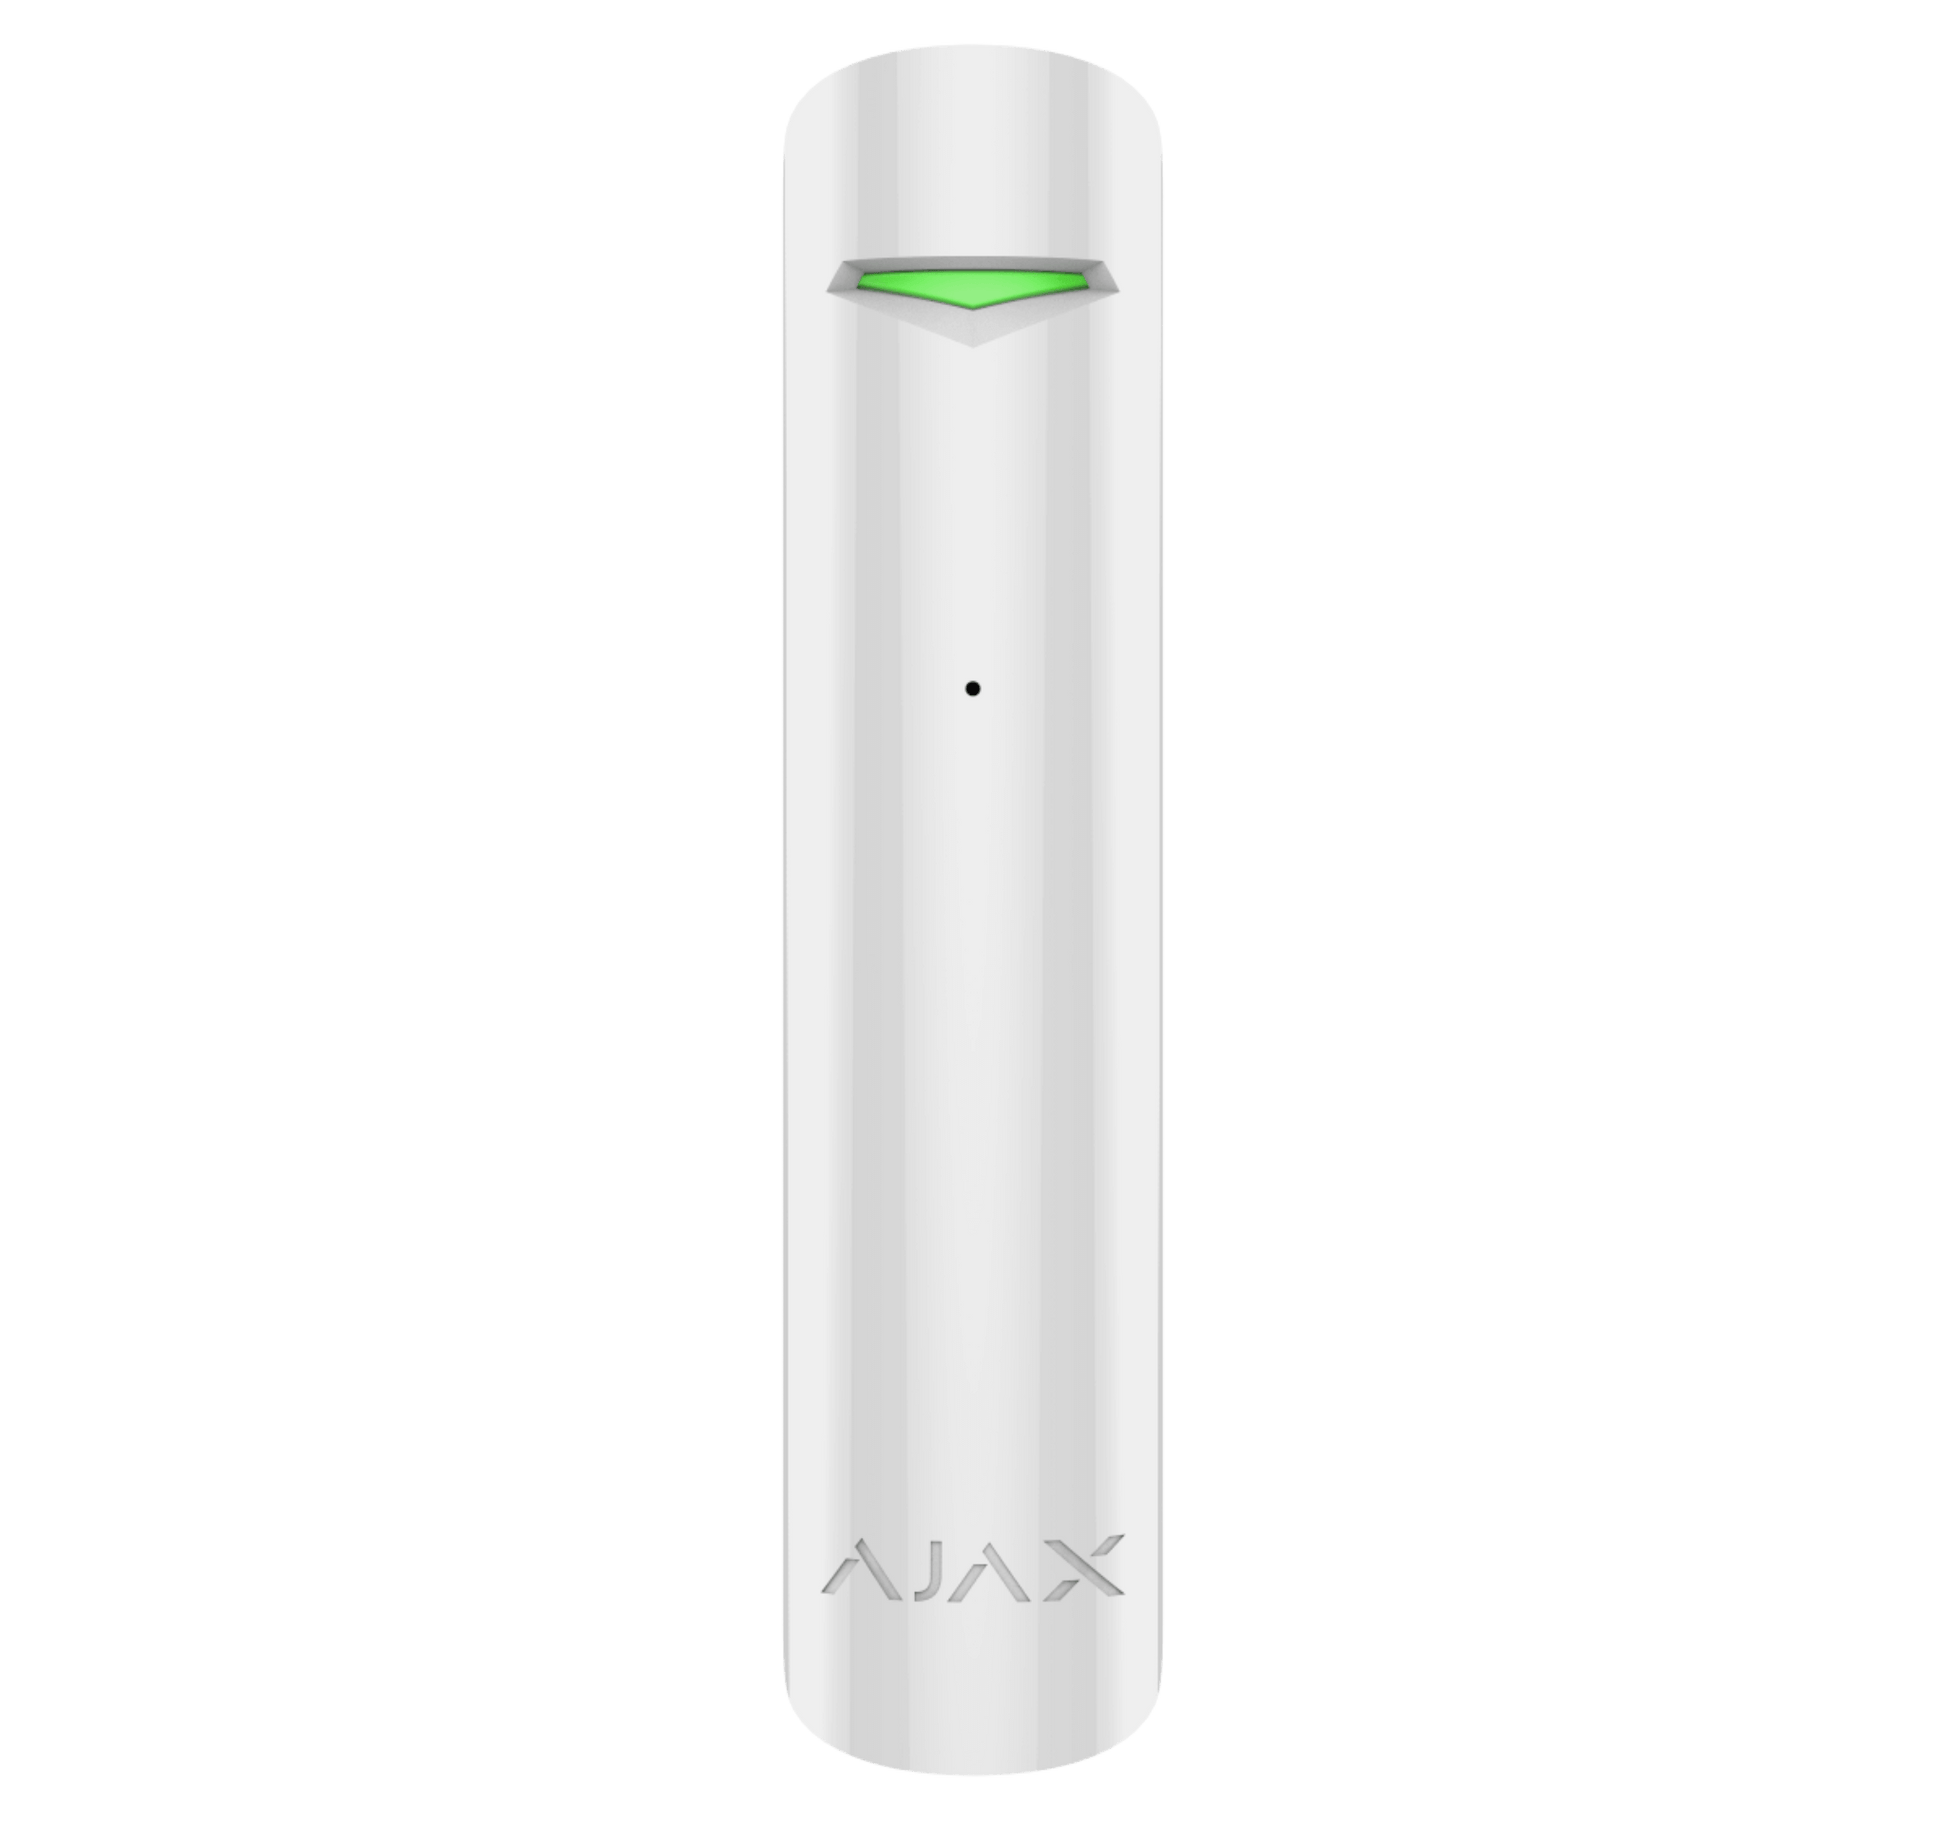 White Ajax GlassProtect glass break sensor, front view 20 × 90 mm in size IP50 rated. wireless detector